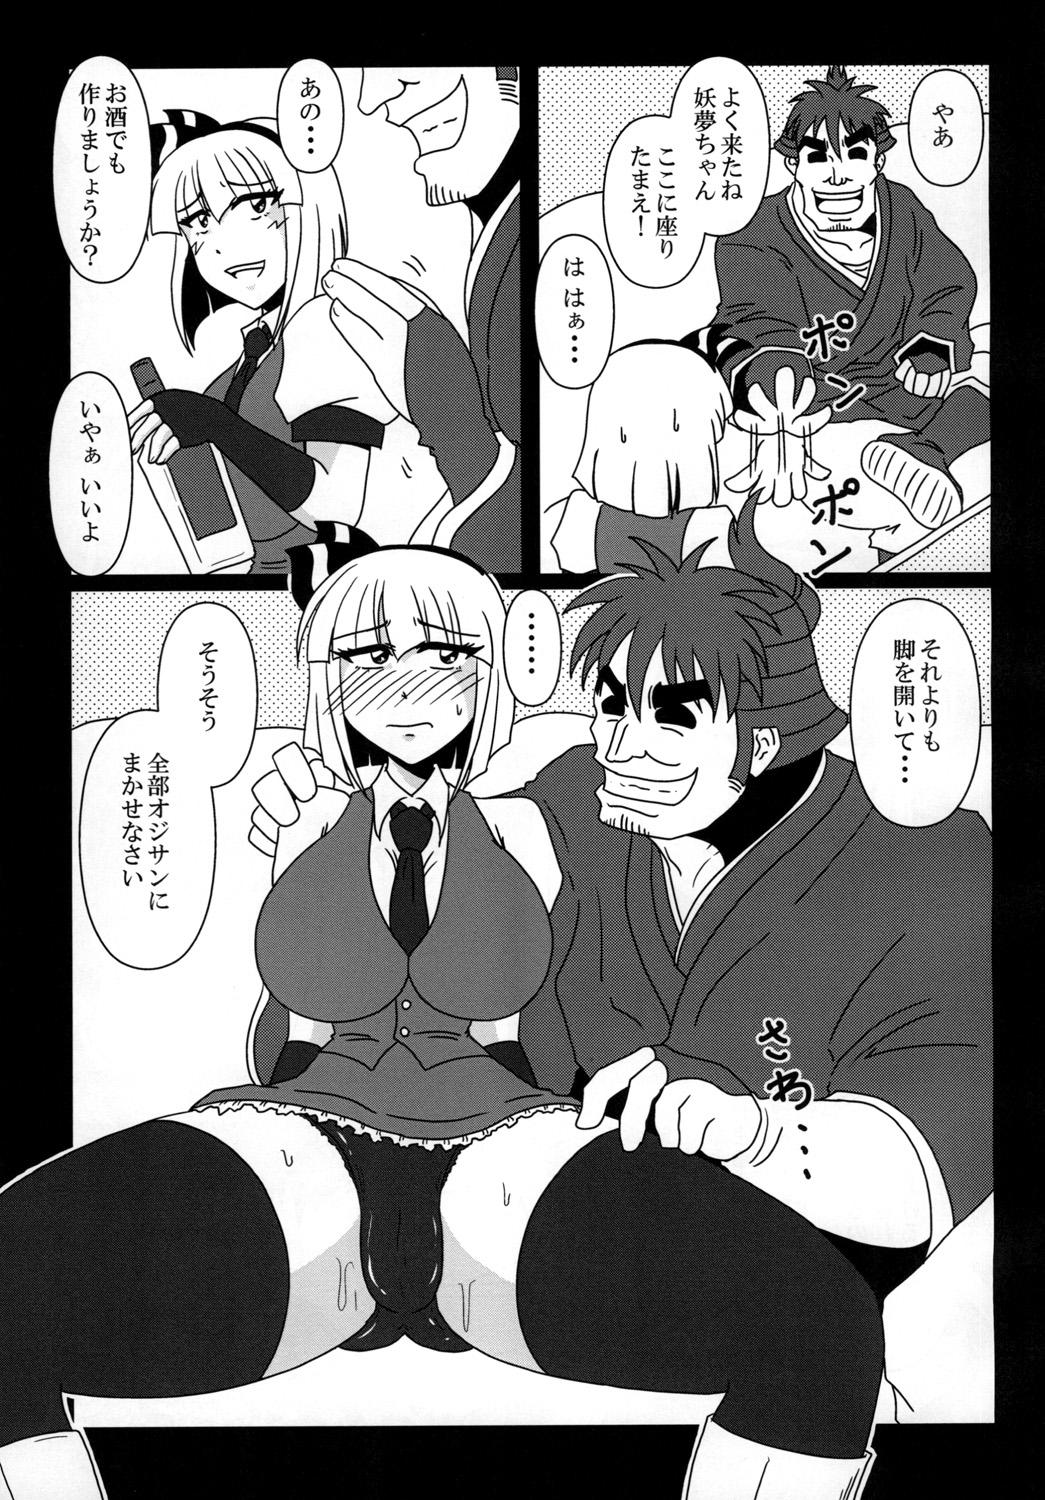 Massage 魂魄妖夢バイトやらされてます! - Touhou project Girlfriends - Page 11